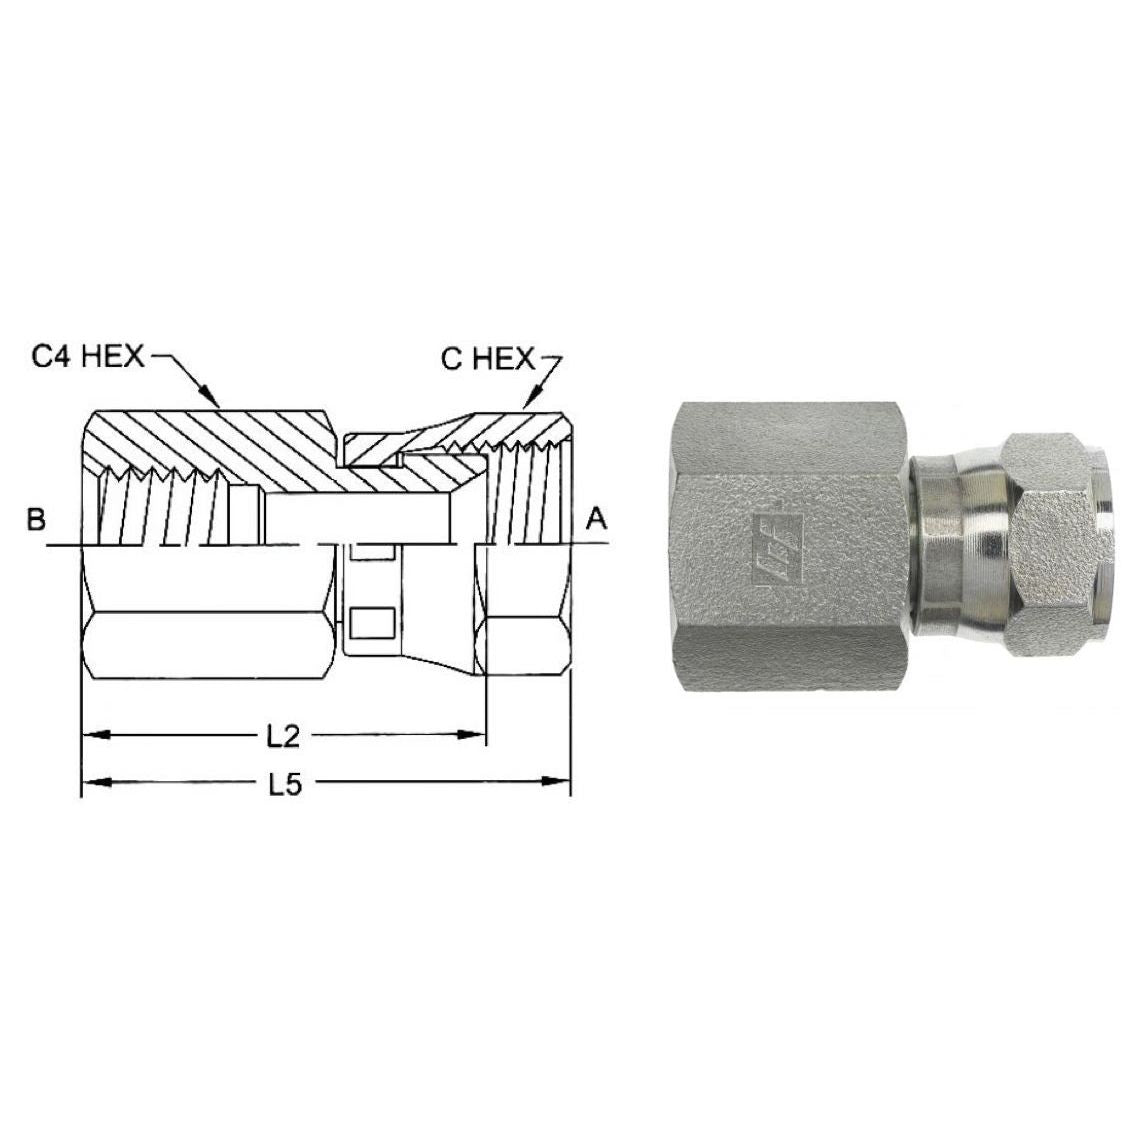 6506-04-06-SS : OneHydraulicsAdapter, Straight, 0.25 (1/4") Female JIC x 0.375 (3/8") Female, Stainless Steel, 6000psi